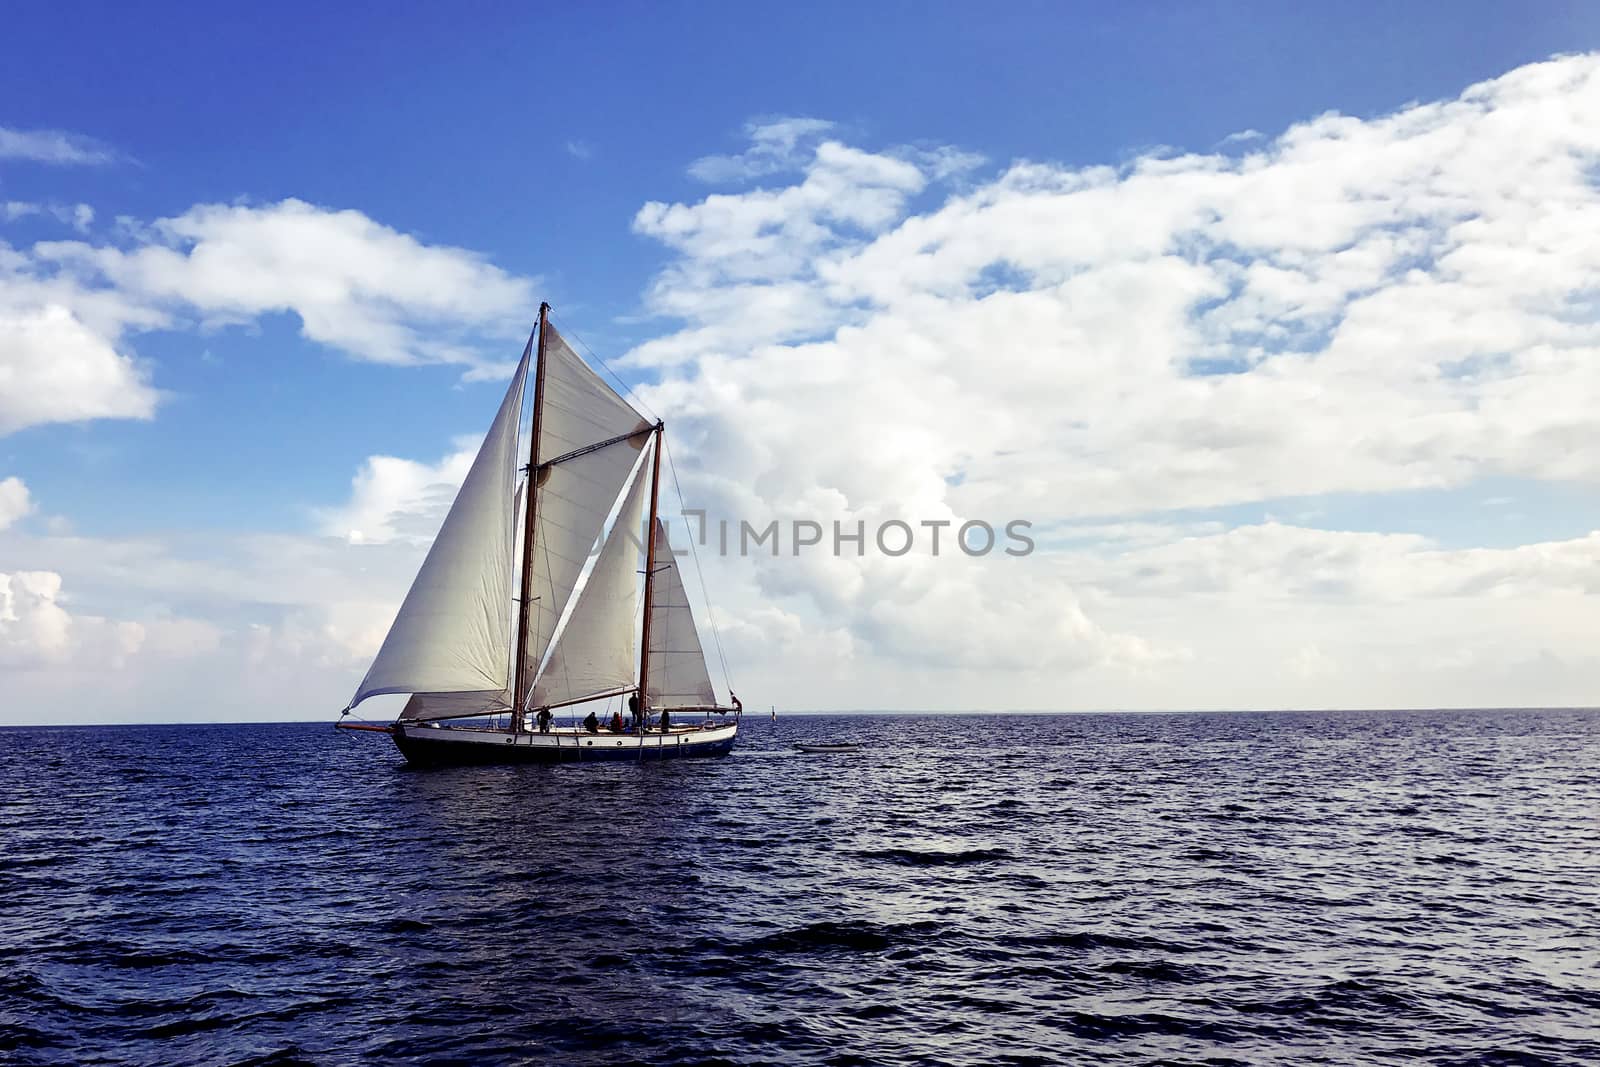 Vintage sail boat sailing on dark blue ocean under blue and cloudy sky.